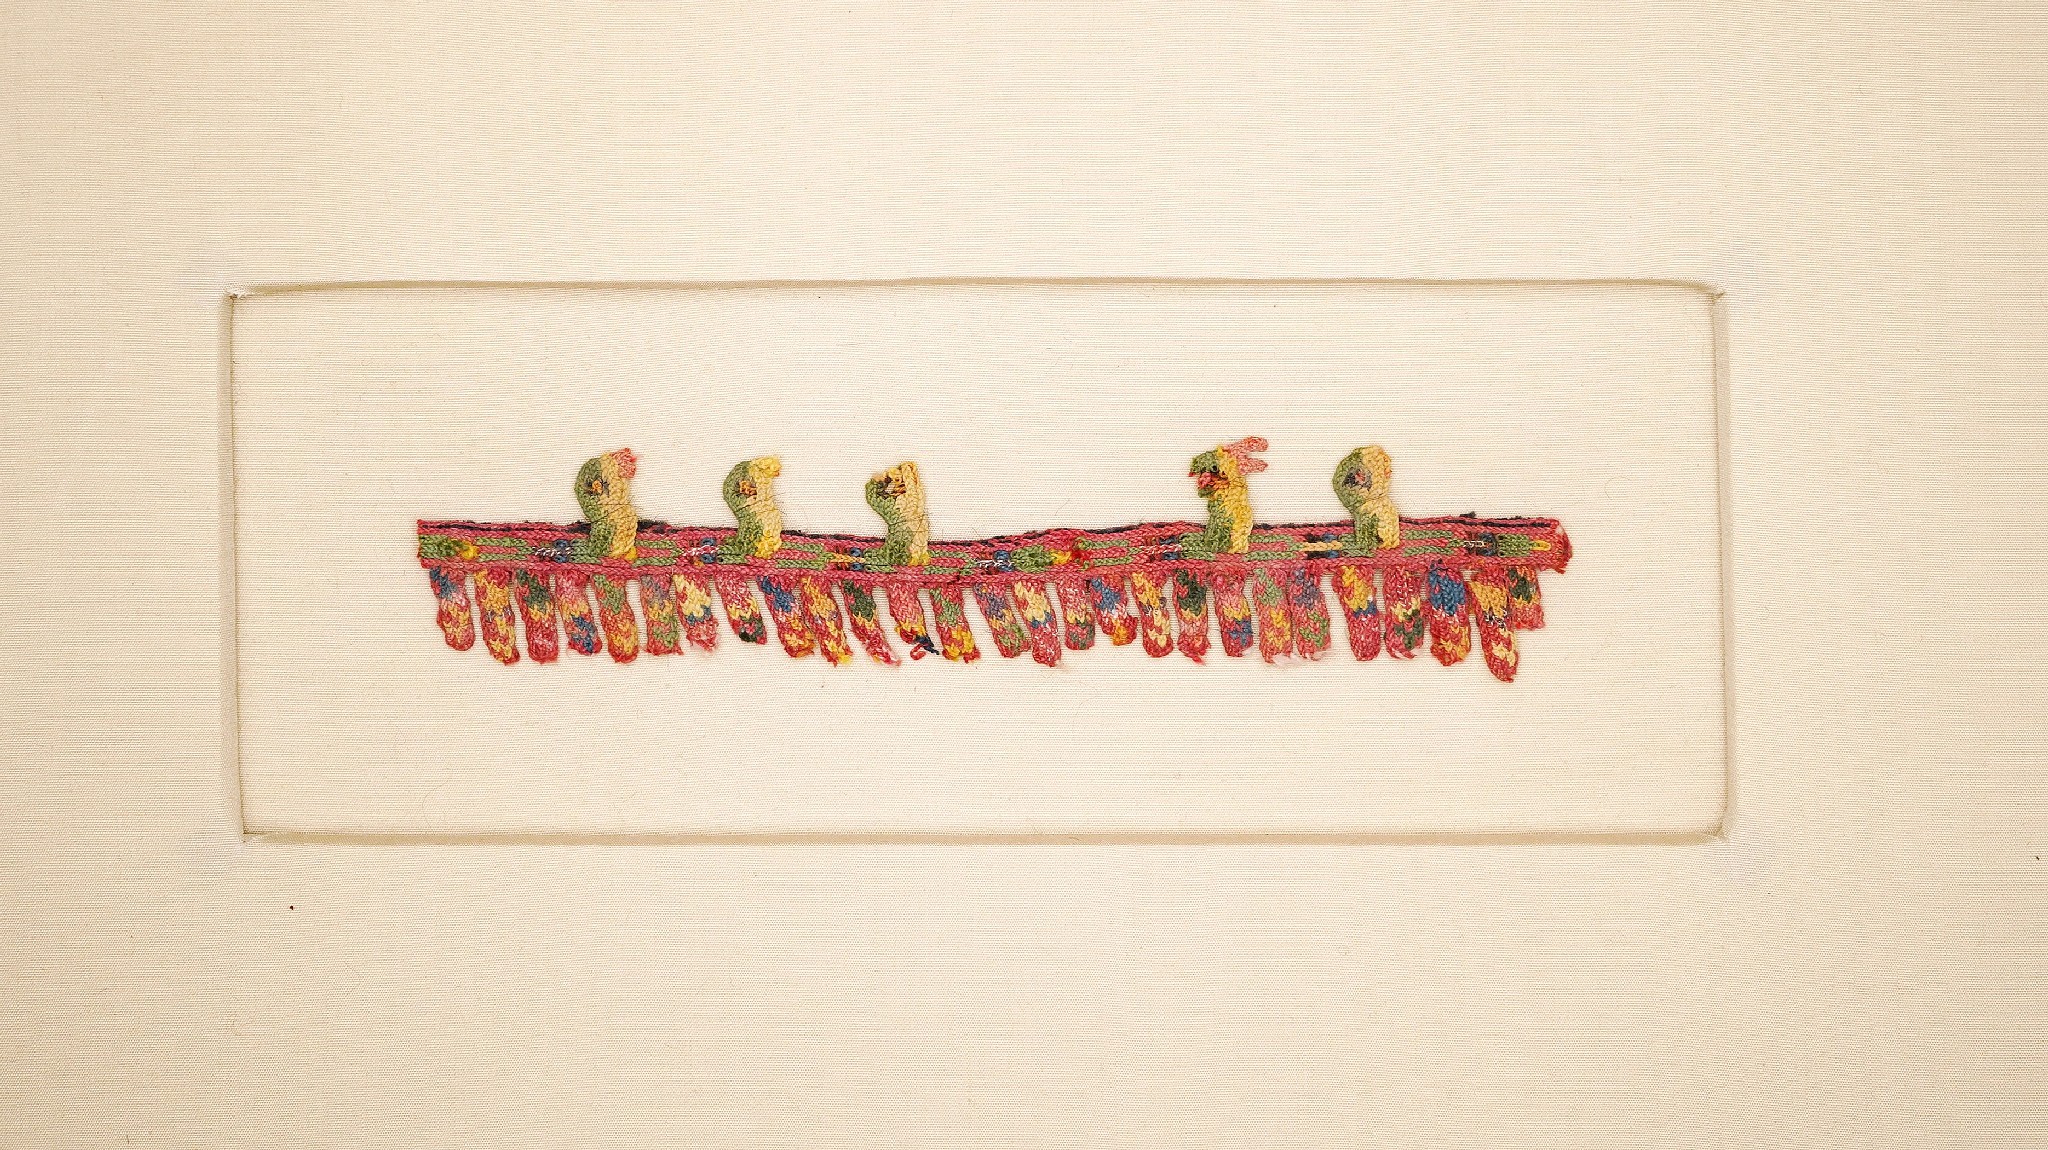 Peru, Paracas Border Fringe with Five Colorful Birds
This intricate border fringe was needle-knitted with a variety of colored threads made from natural plant and mineral dyes of the Andes.  The border fringe depicts 5 baby birds waiting in a nest with heads craned upwards, eagerly waiting to be fed some worms.  The fringe originally had six birds - one is missing to the right of center.  Excellent color.  Ex. collection Ferdinand Anton, Germany, prior to 1980.  Mounted on neutral cream-colored mat.
Peru, Paracas, Late Phase, South Coast, c. 200 BC - AD 100
Media: Textile
Dimensions: Width: 6 1/2" x Height: 1 1/2" Frame : 16" x 10"
$500
79040